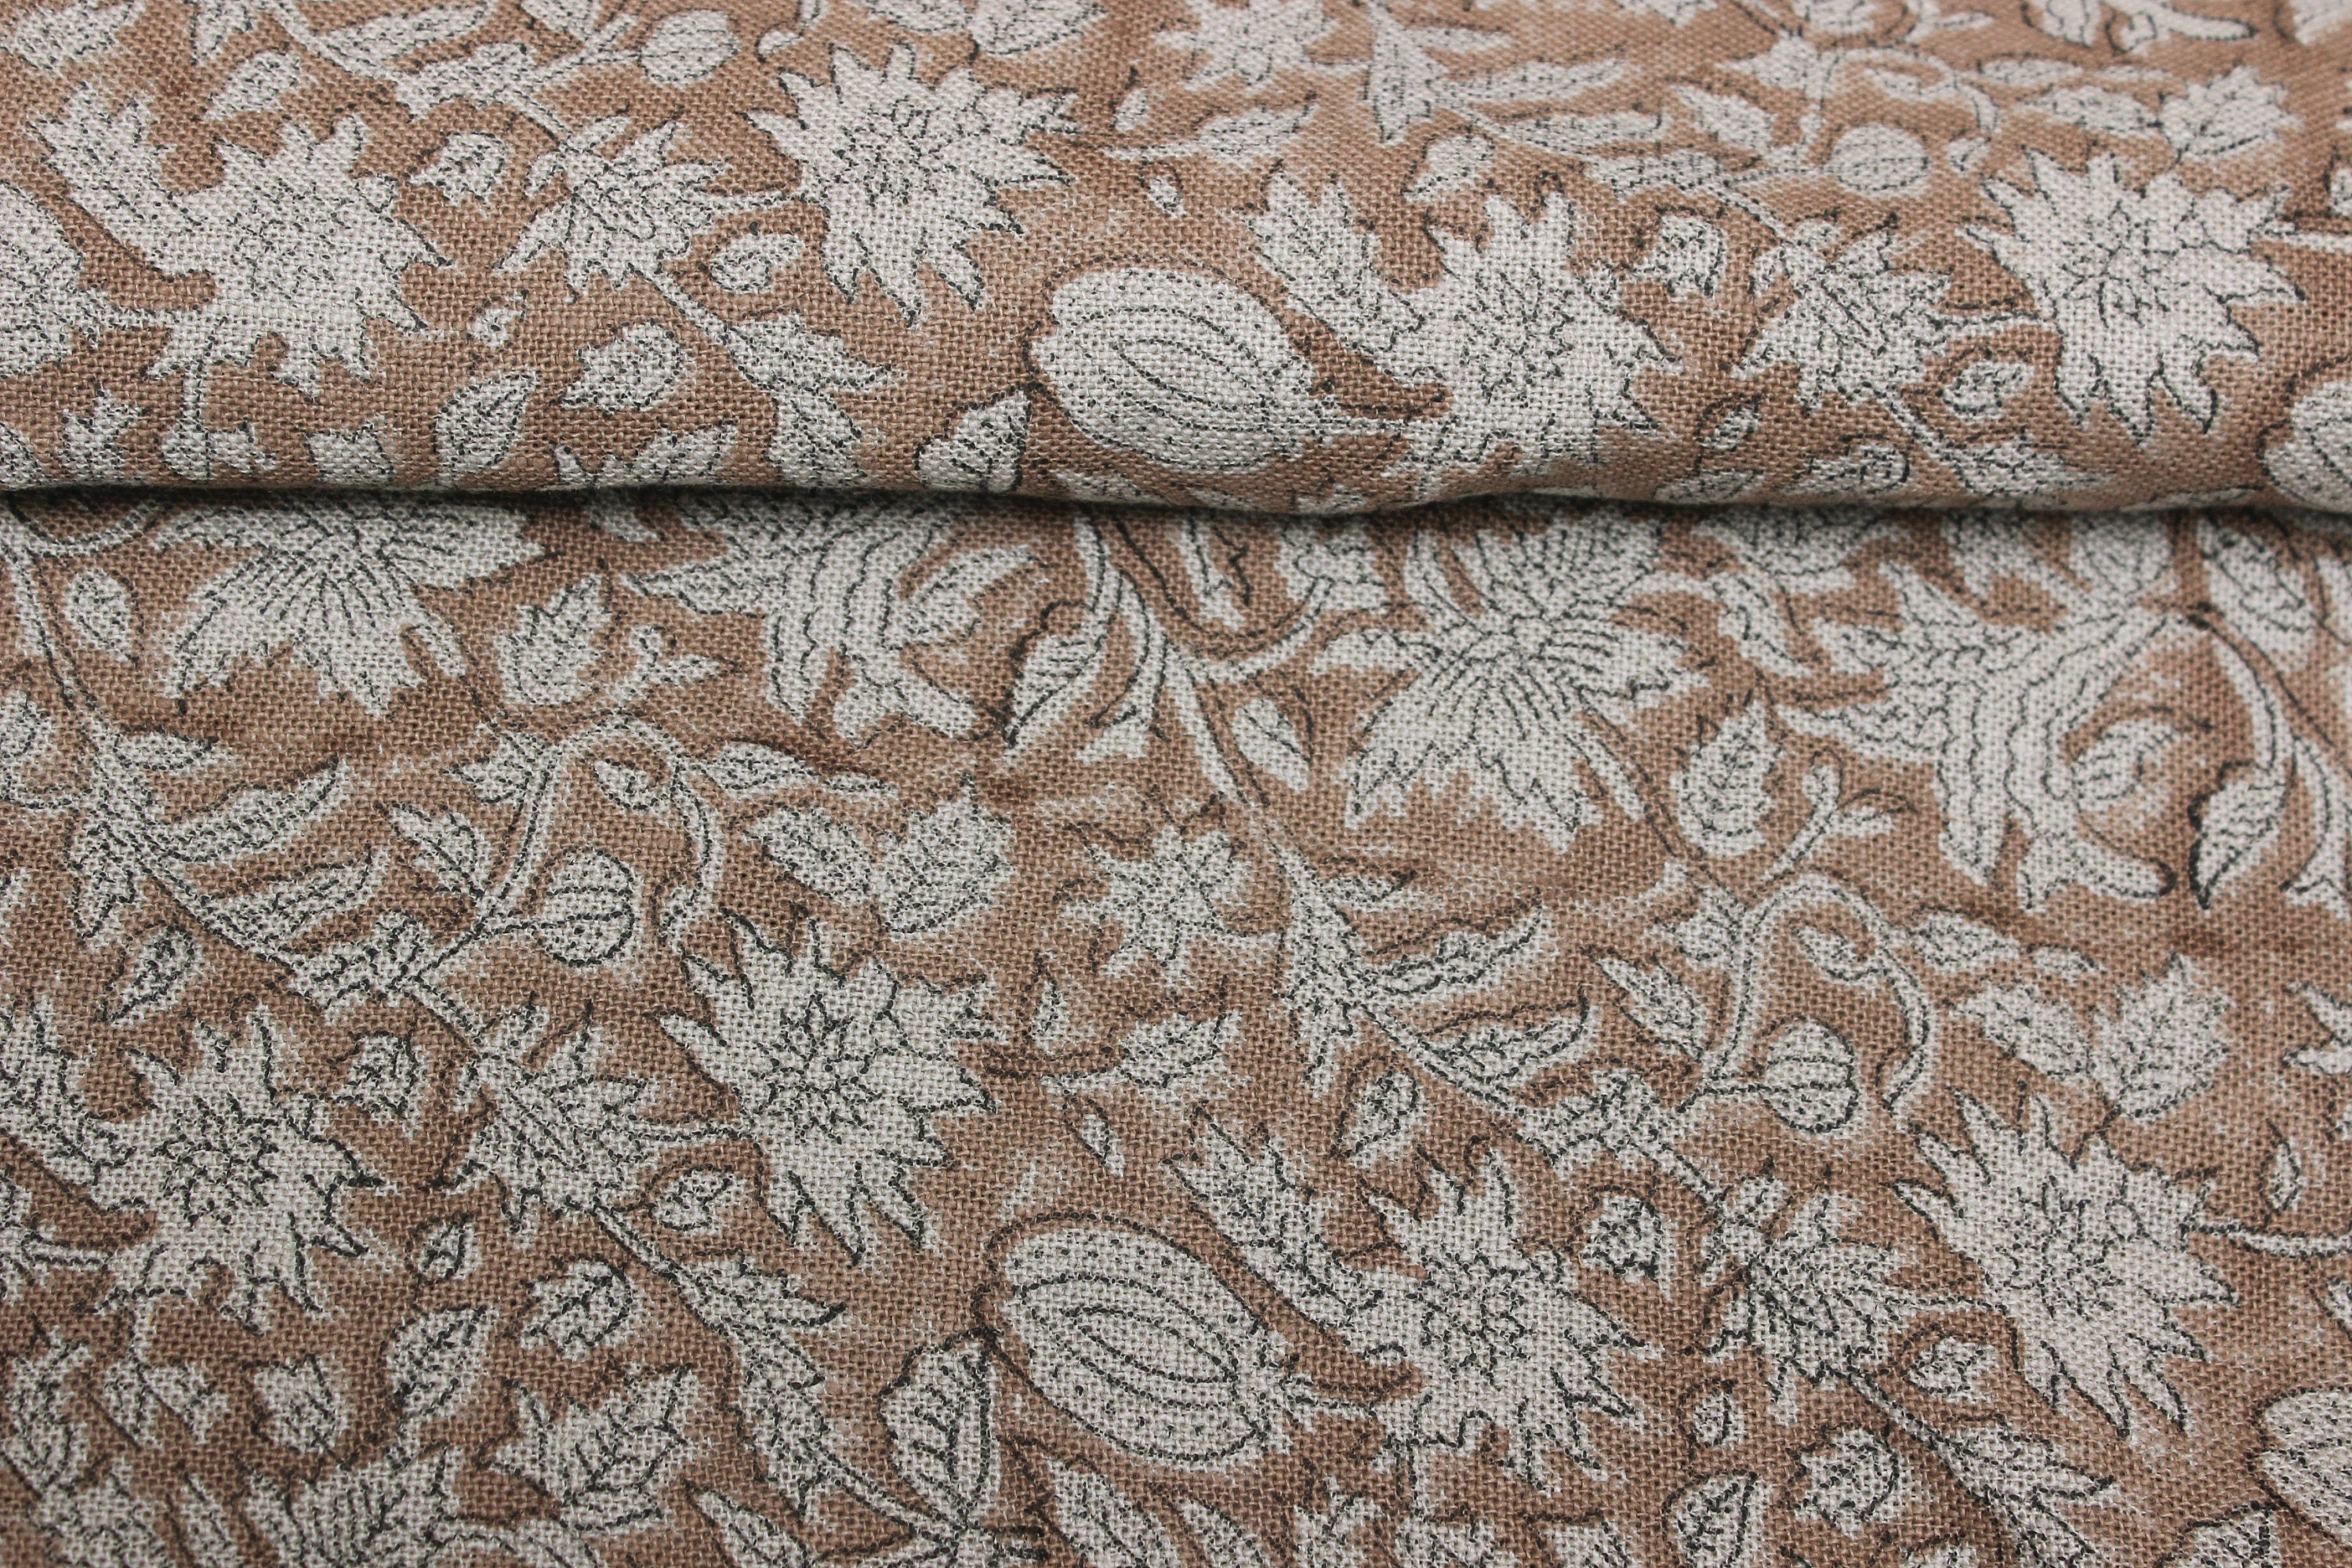 Block Print Linen Fabric, Manikarnika  Block Print Fabric, Floral Print Linen, By The Yards, Pillow Cover Fabric For Table Cloth, Thick Linen Fabric For Upholstery